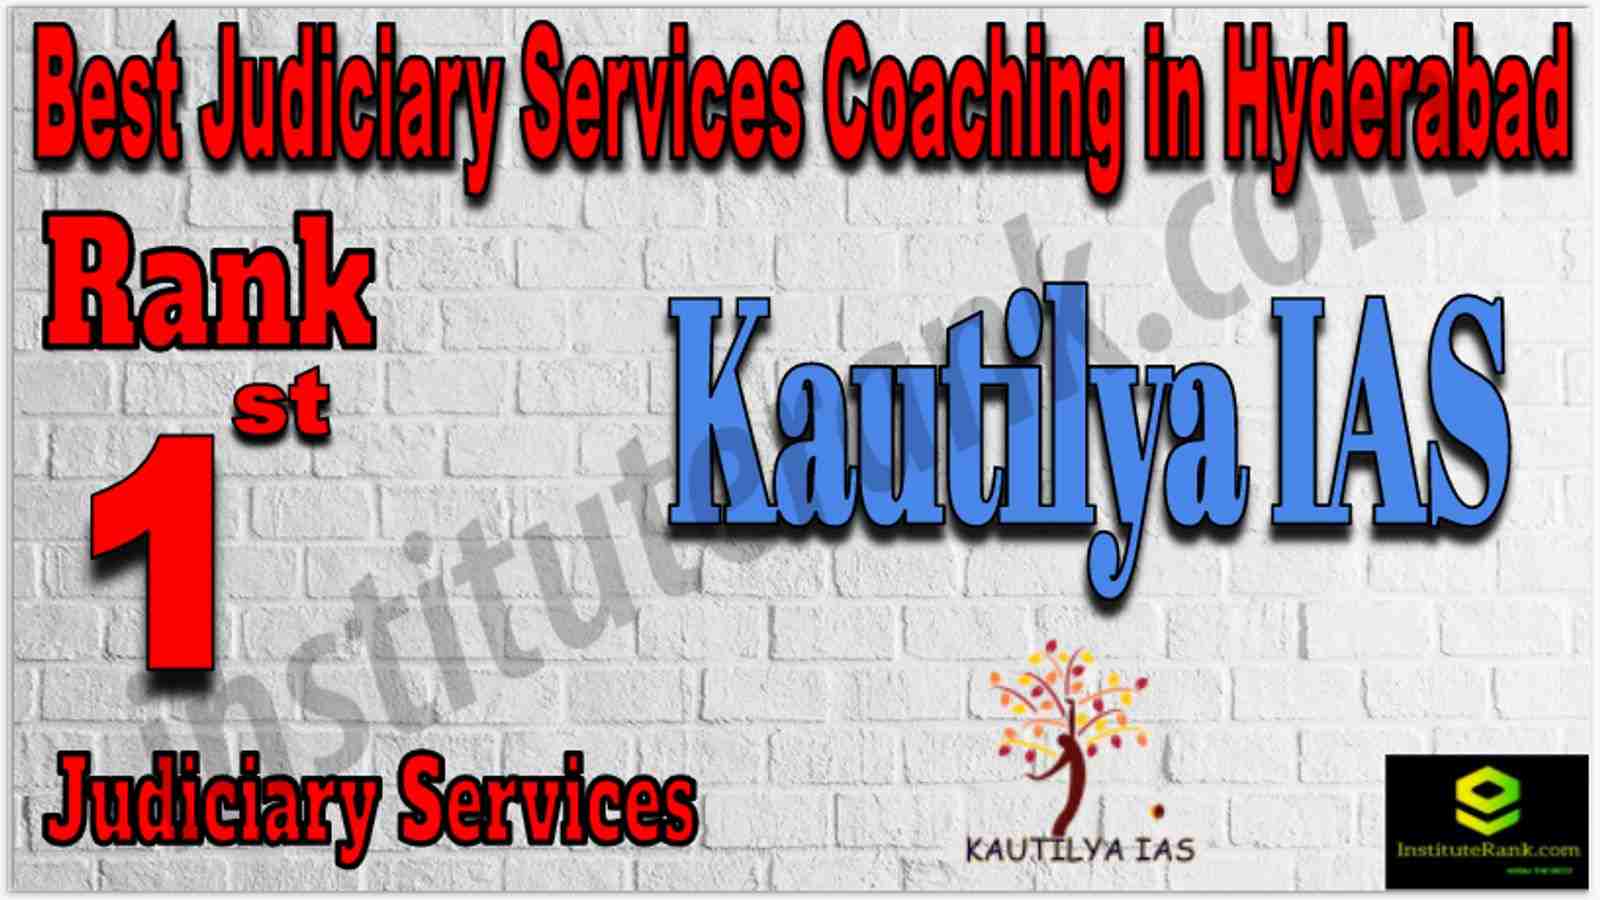 Rank 1 Best Judiciary Services Coaching in Hyderabad